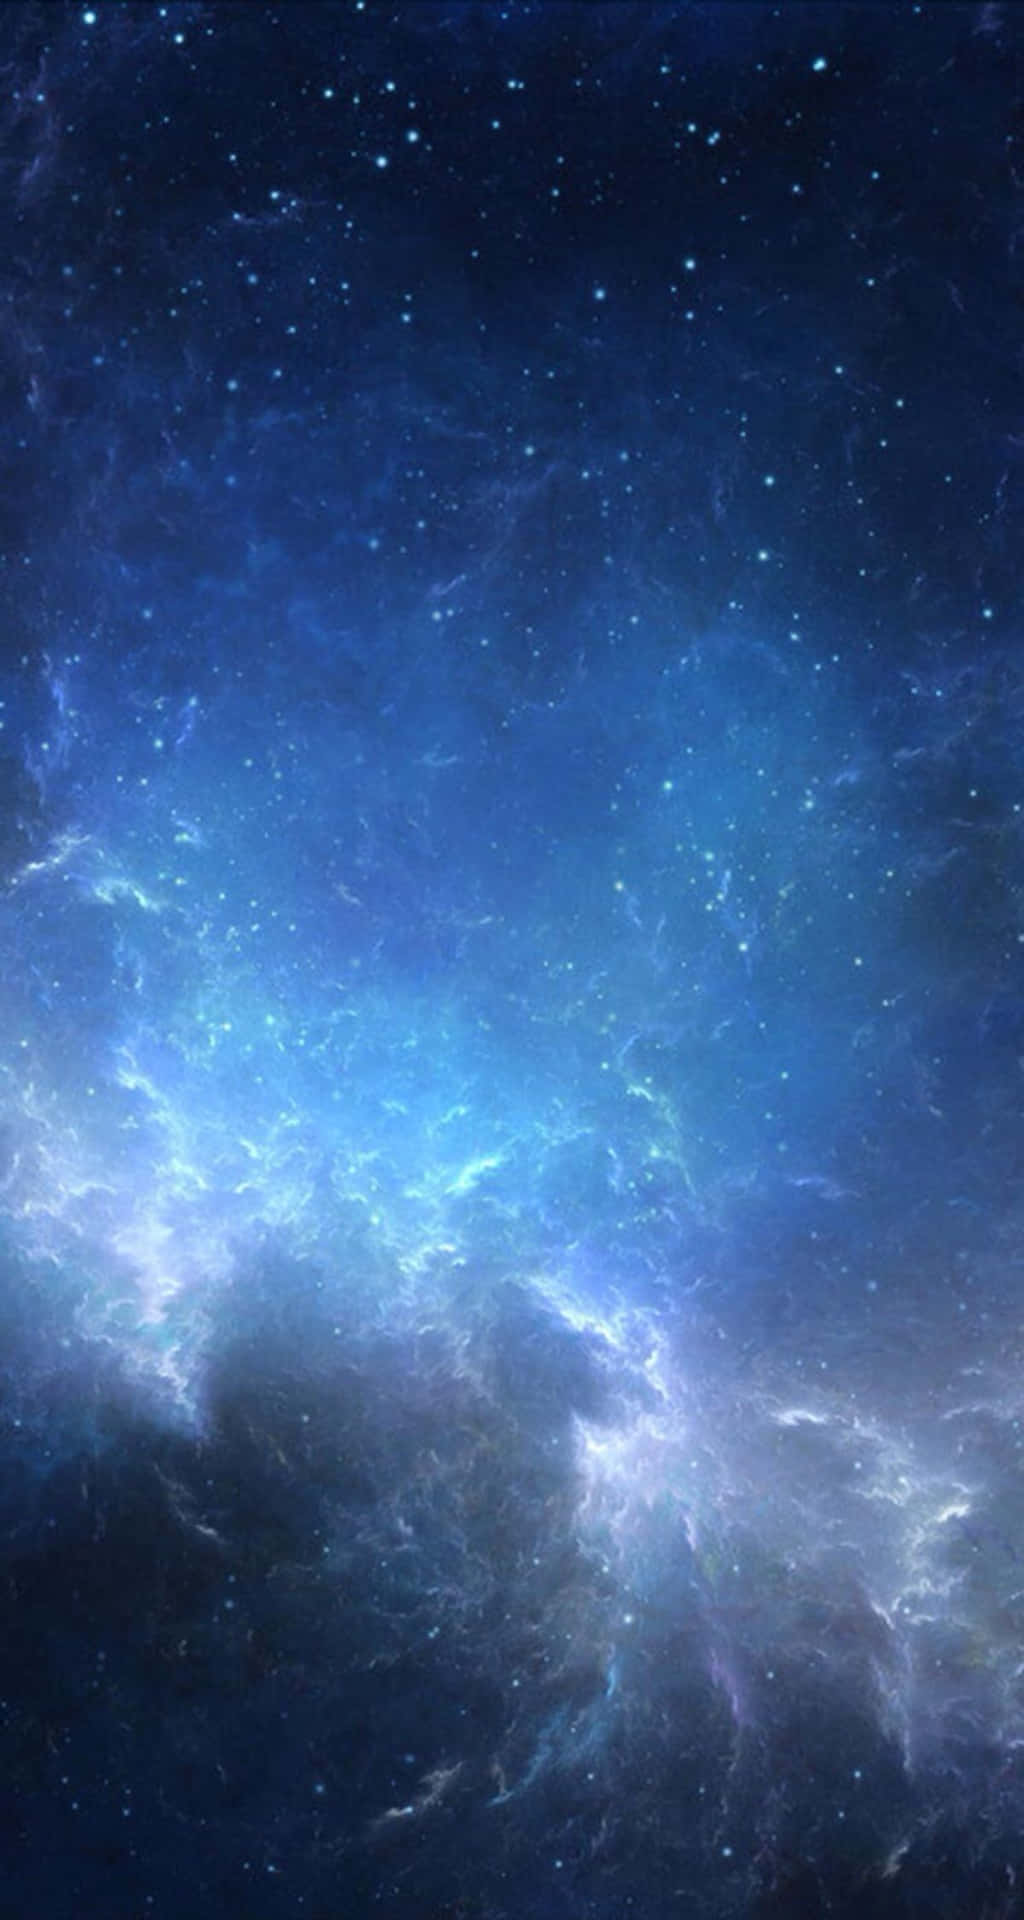 Get creative with the Blue Galaxy iPhone Wallpaper